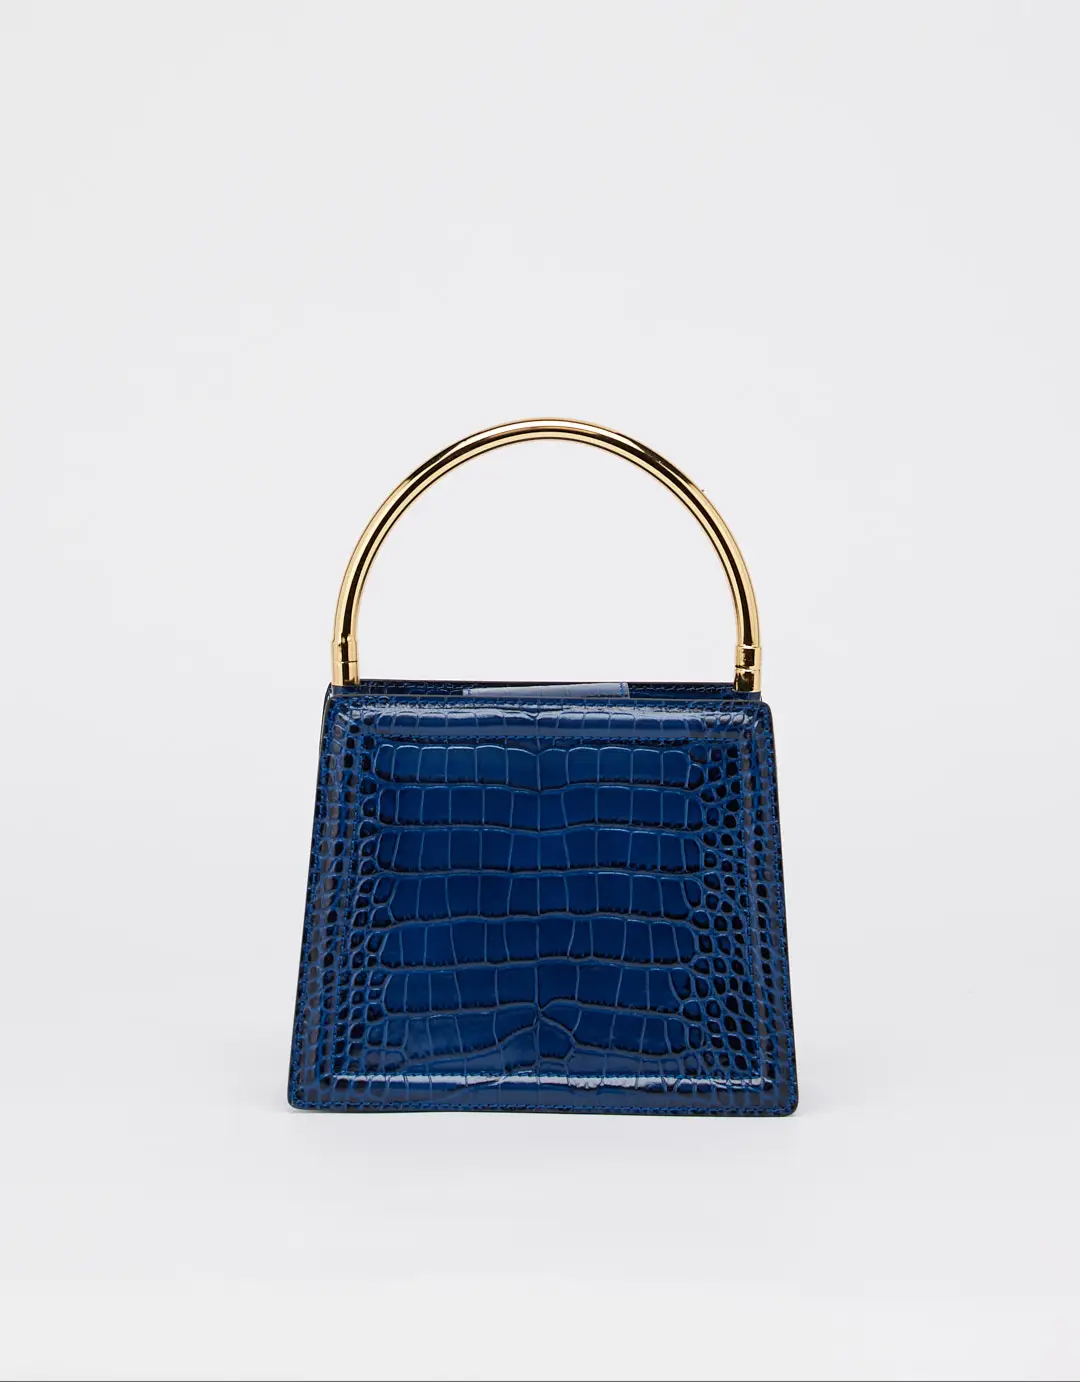 This beautiful leather handbag is perfect for any sophisticated woman who wants to make a statement. The croco print is eye-catching and unique, while the gold details add a touch of luxury. The detachable long strap makes it easy to carry, and the Nora's print adds a touch of personality.